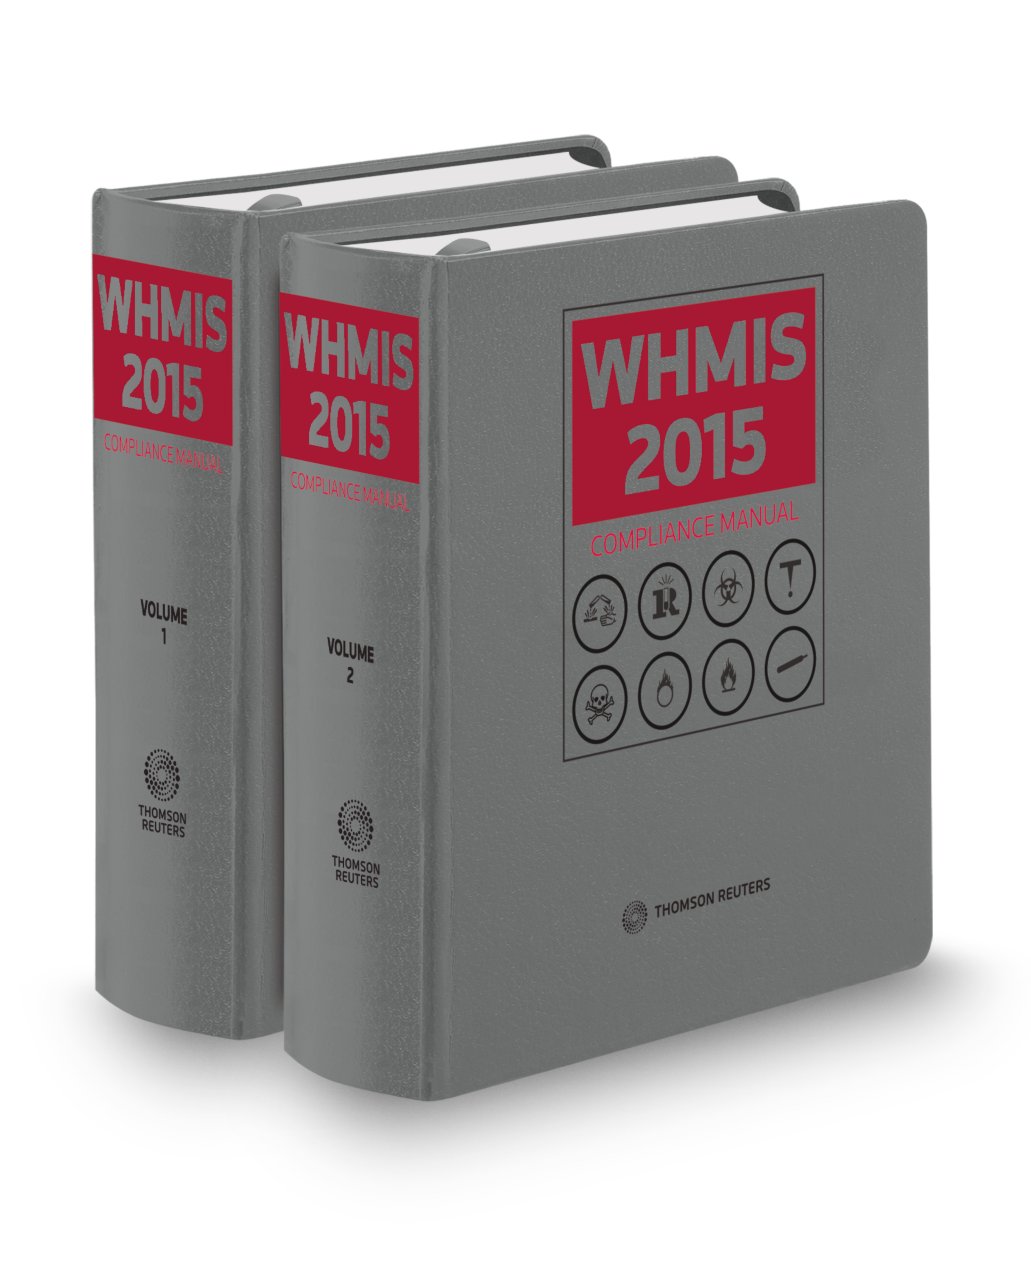 Front cover image of the WHMIS 2015 Compliance Manual.